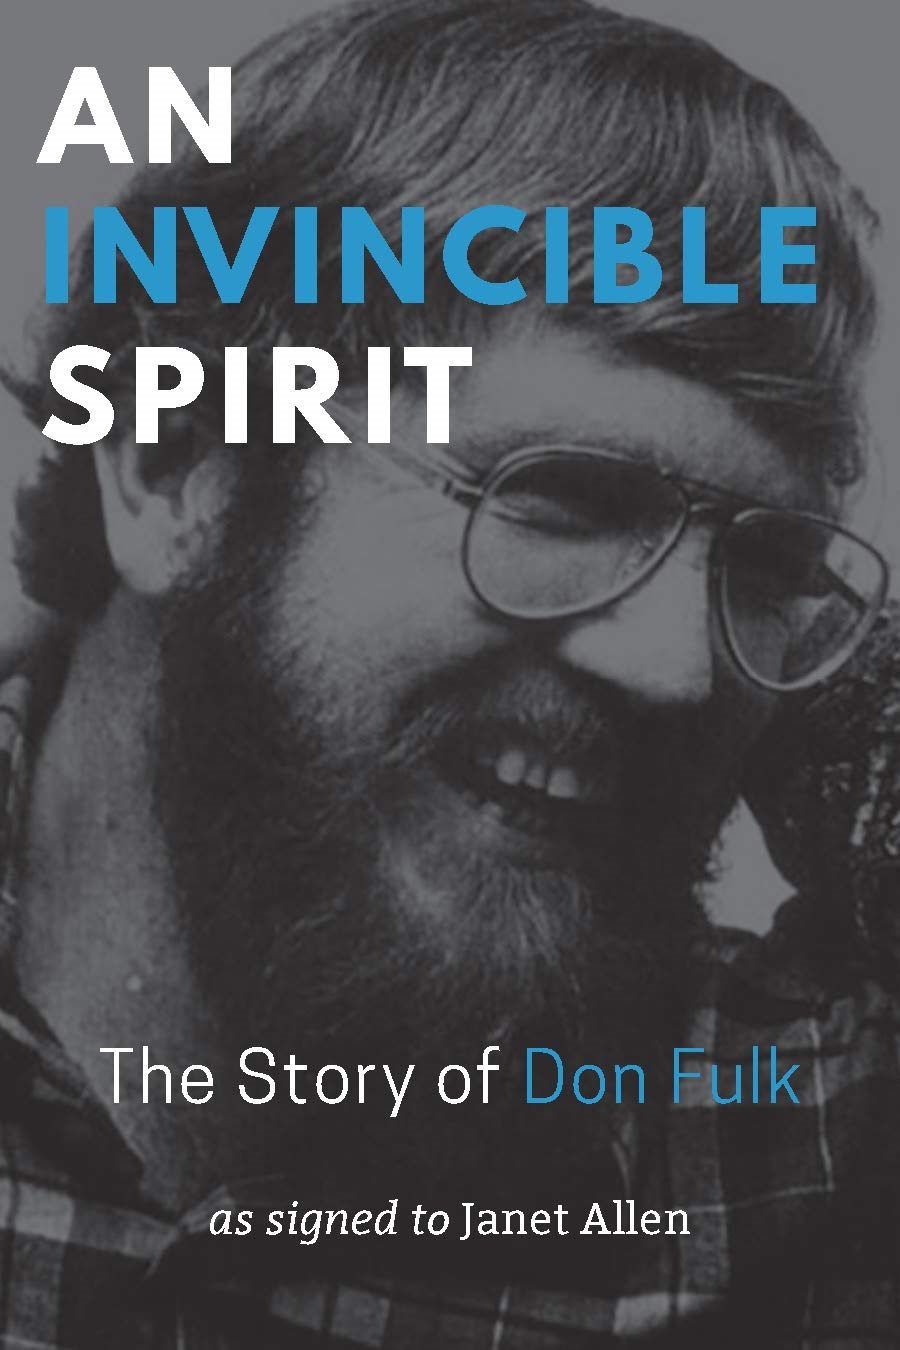 Book cover black and white image of Don Fulk. An Invincible Spirit as signed to Janet Allen.